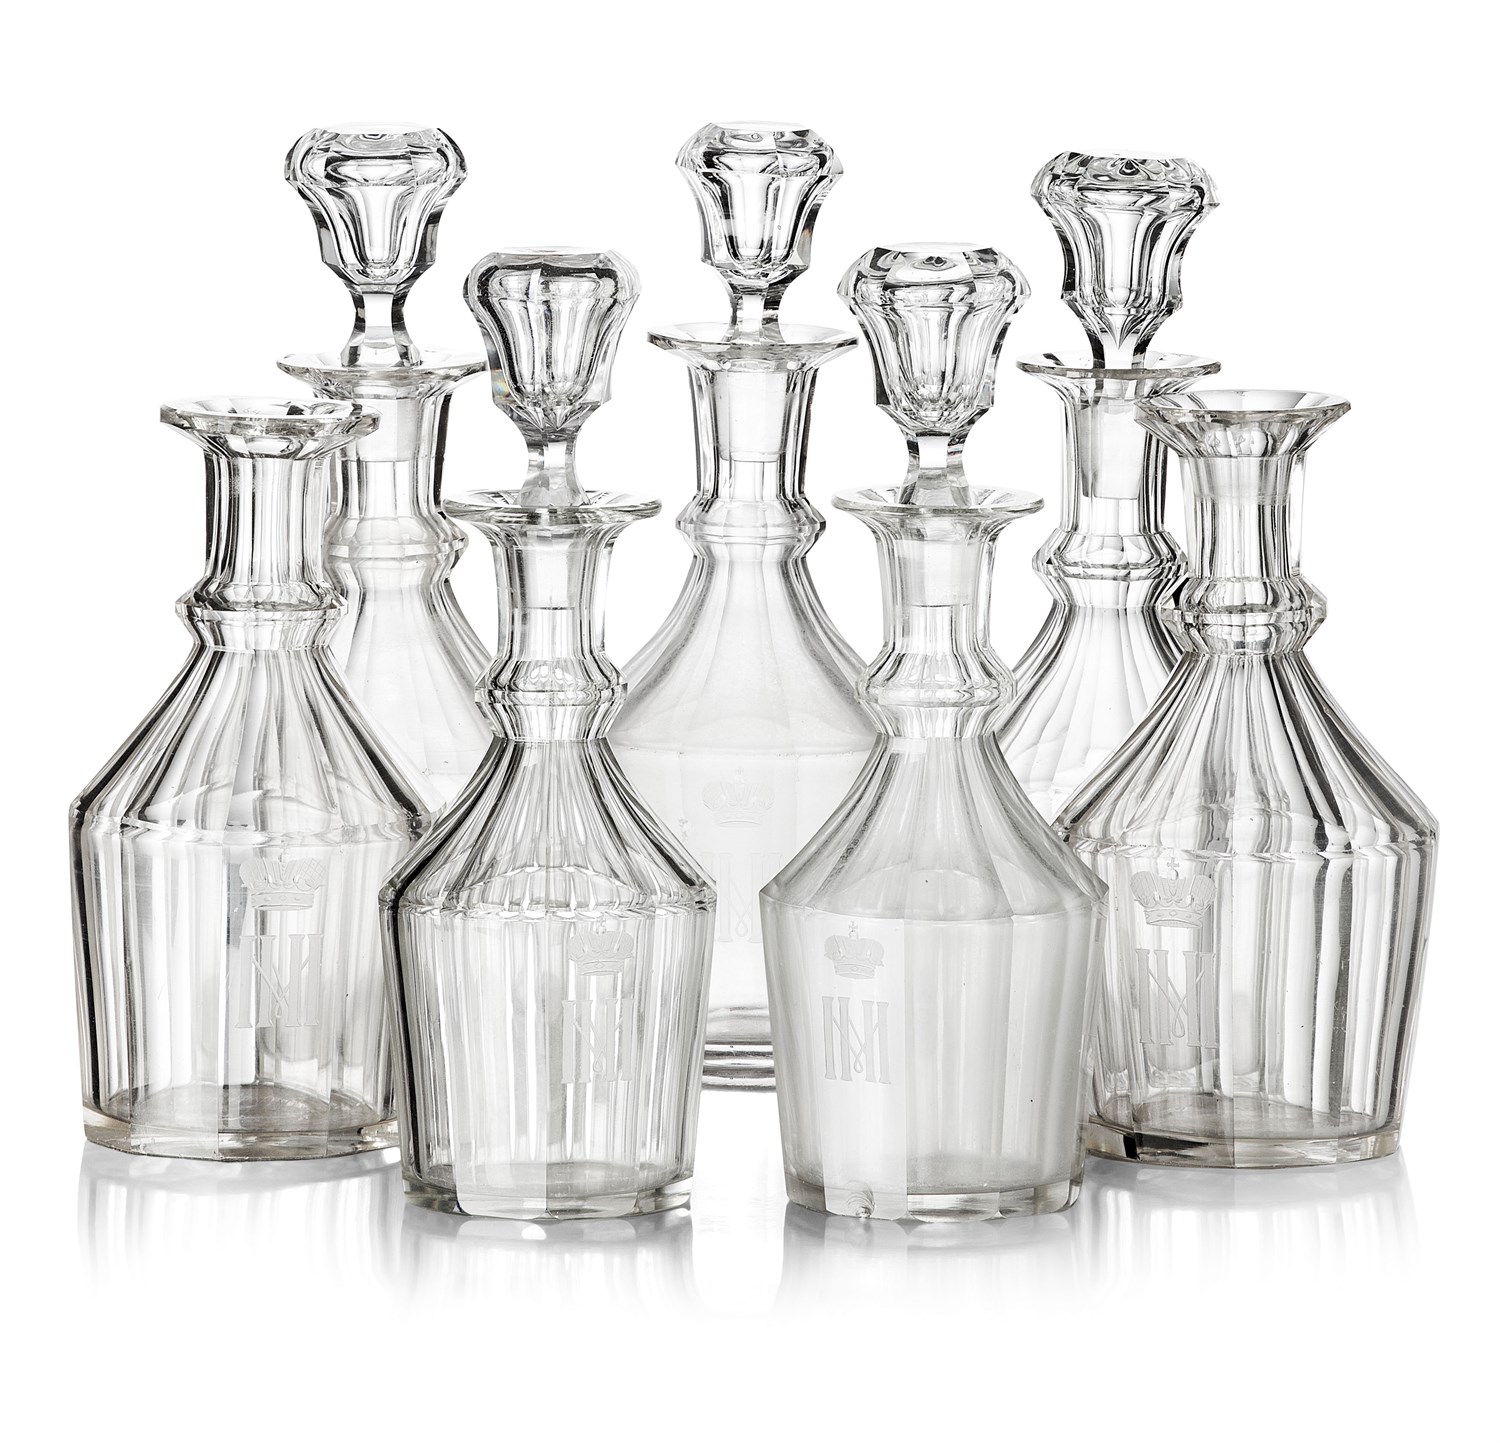 Lot 285 - SEVEN RUSSIAN IMPERIAL GLASS WORKS DECANTERS FROM A GRAND DUKE MICHAEL NIKOLAEVICH BANQUET SERVICE